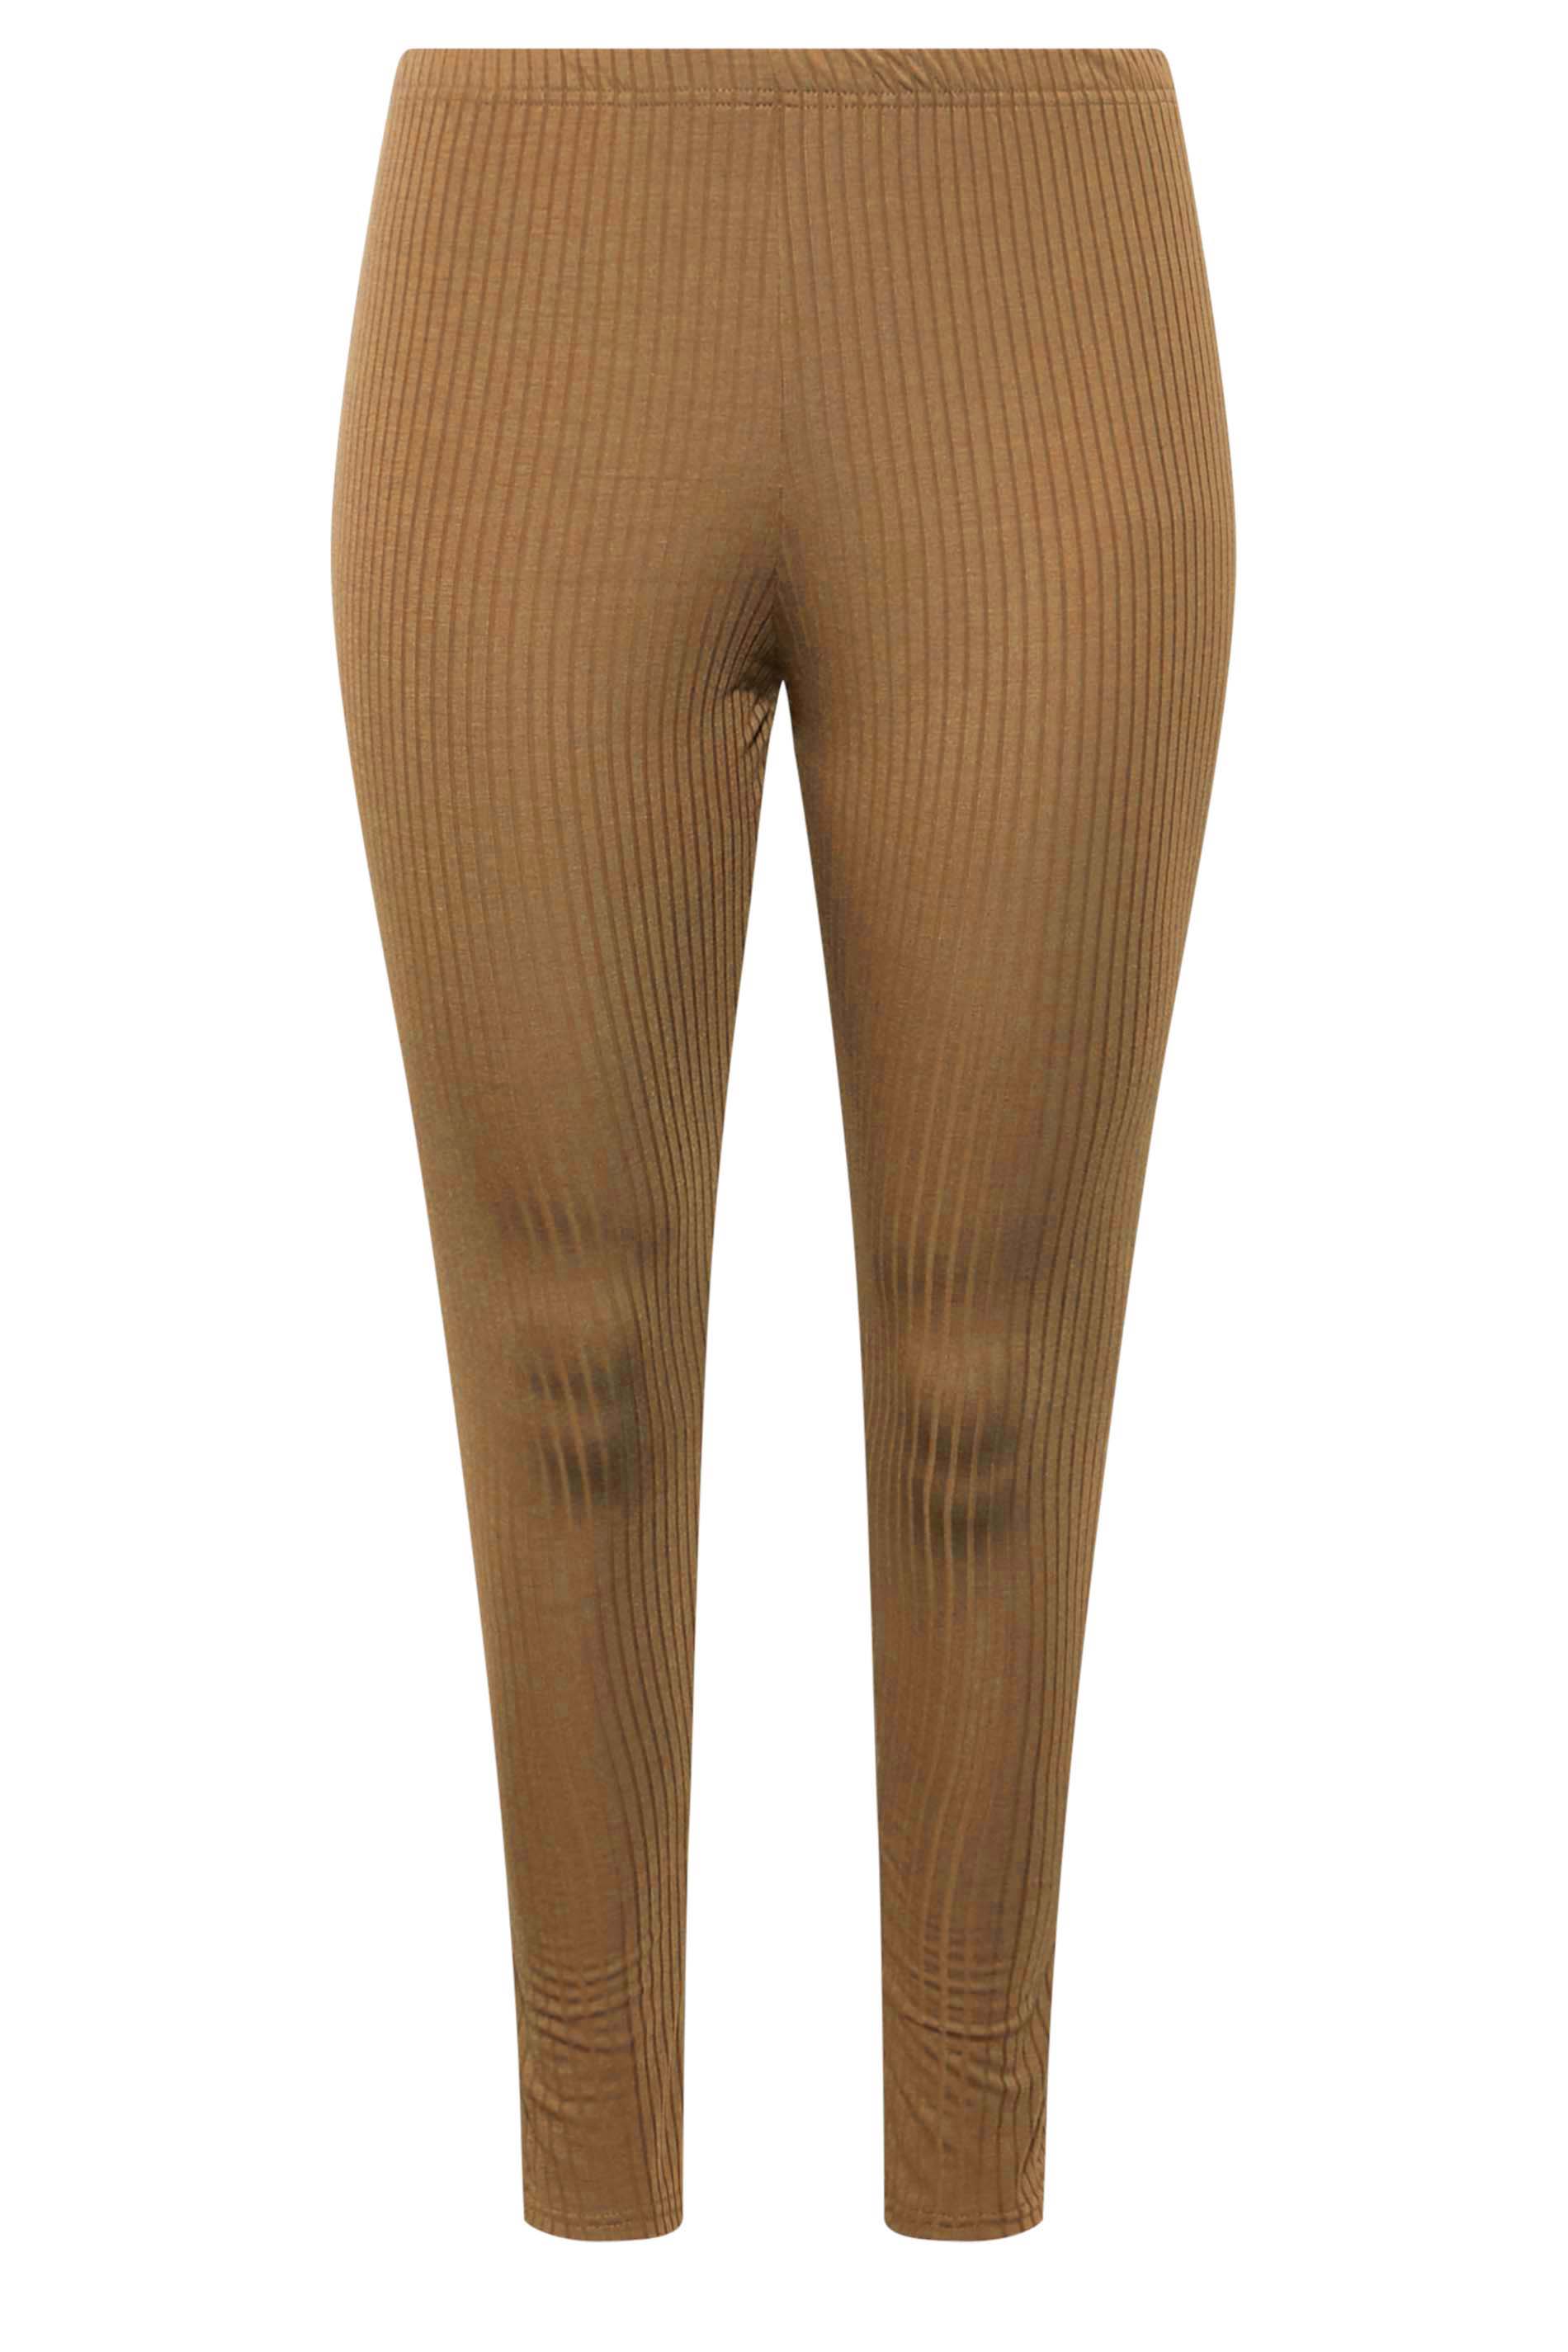 BNWT SUPPLY & DEMAND PLUS SIZE BROWN RIBBED STIRRUP LEGGINGS SIZE XL NEW  NEW